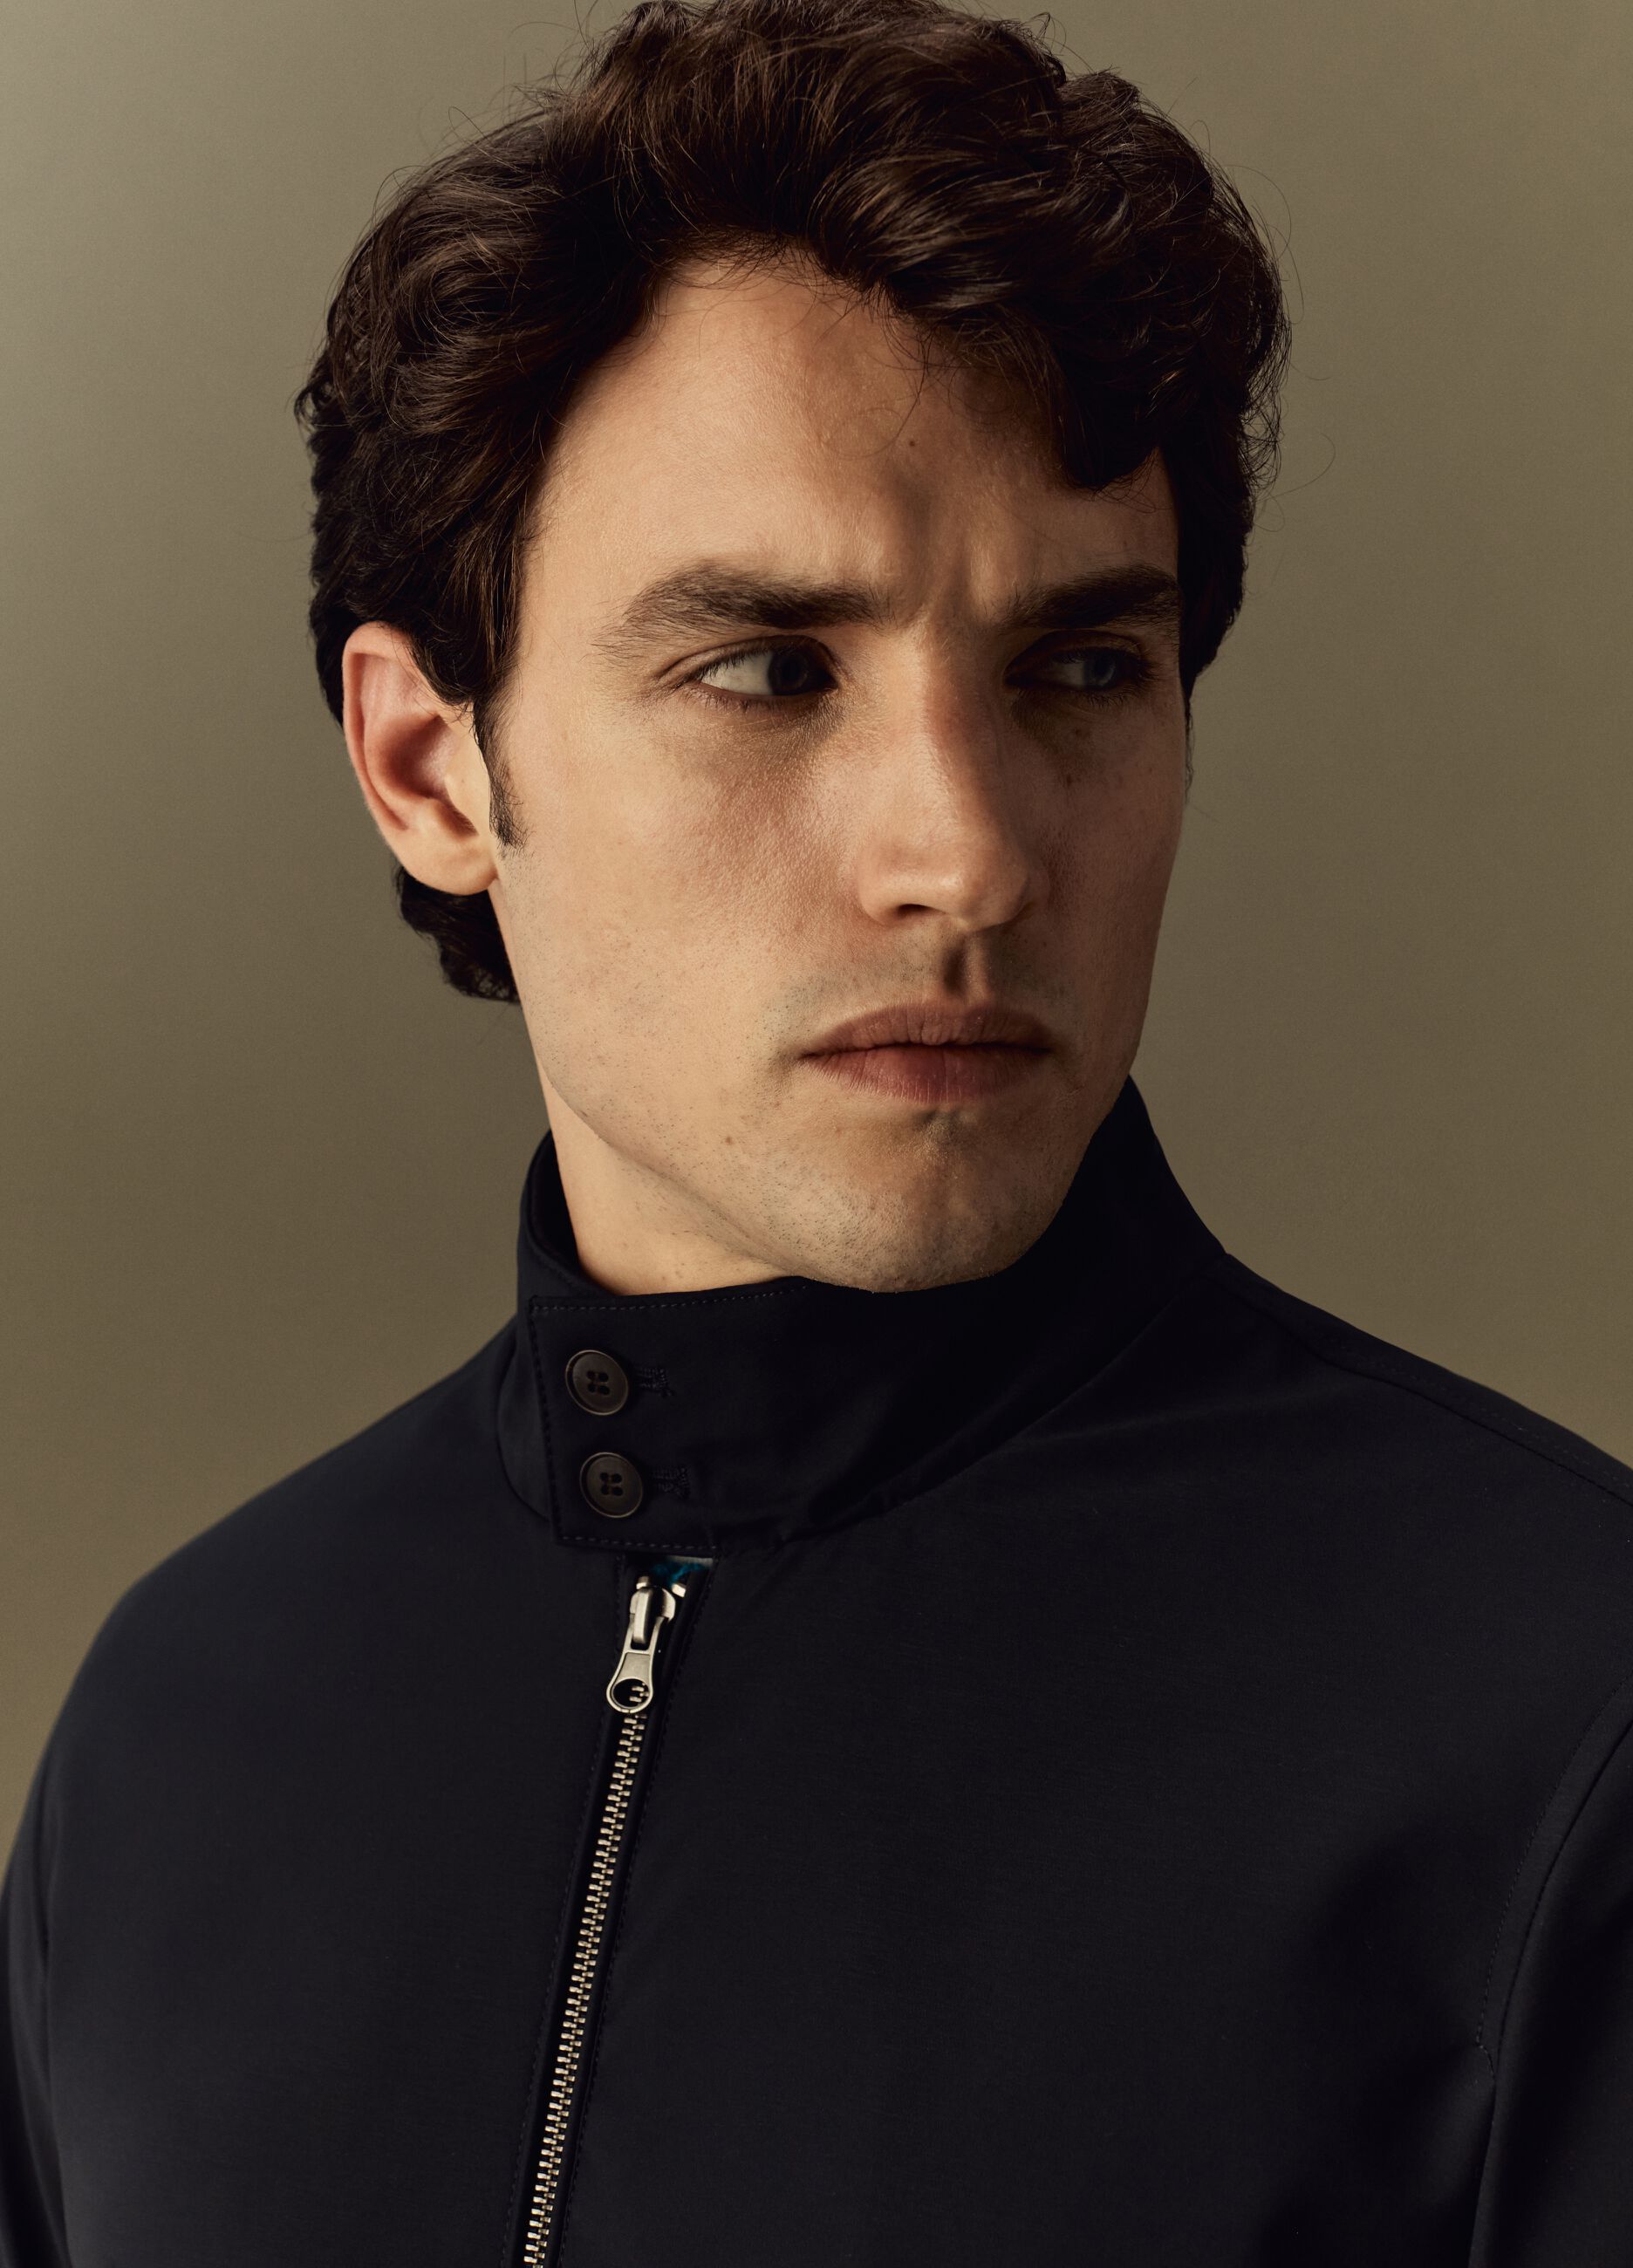 Full-zip bomber jacket with buttons on the neck